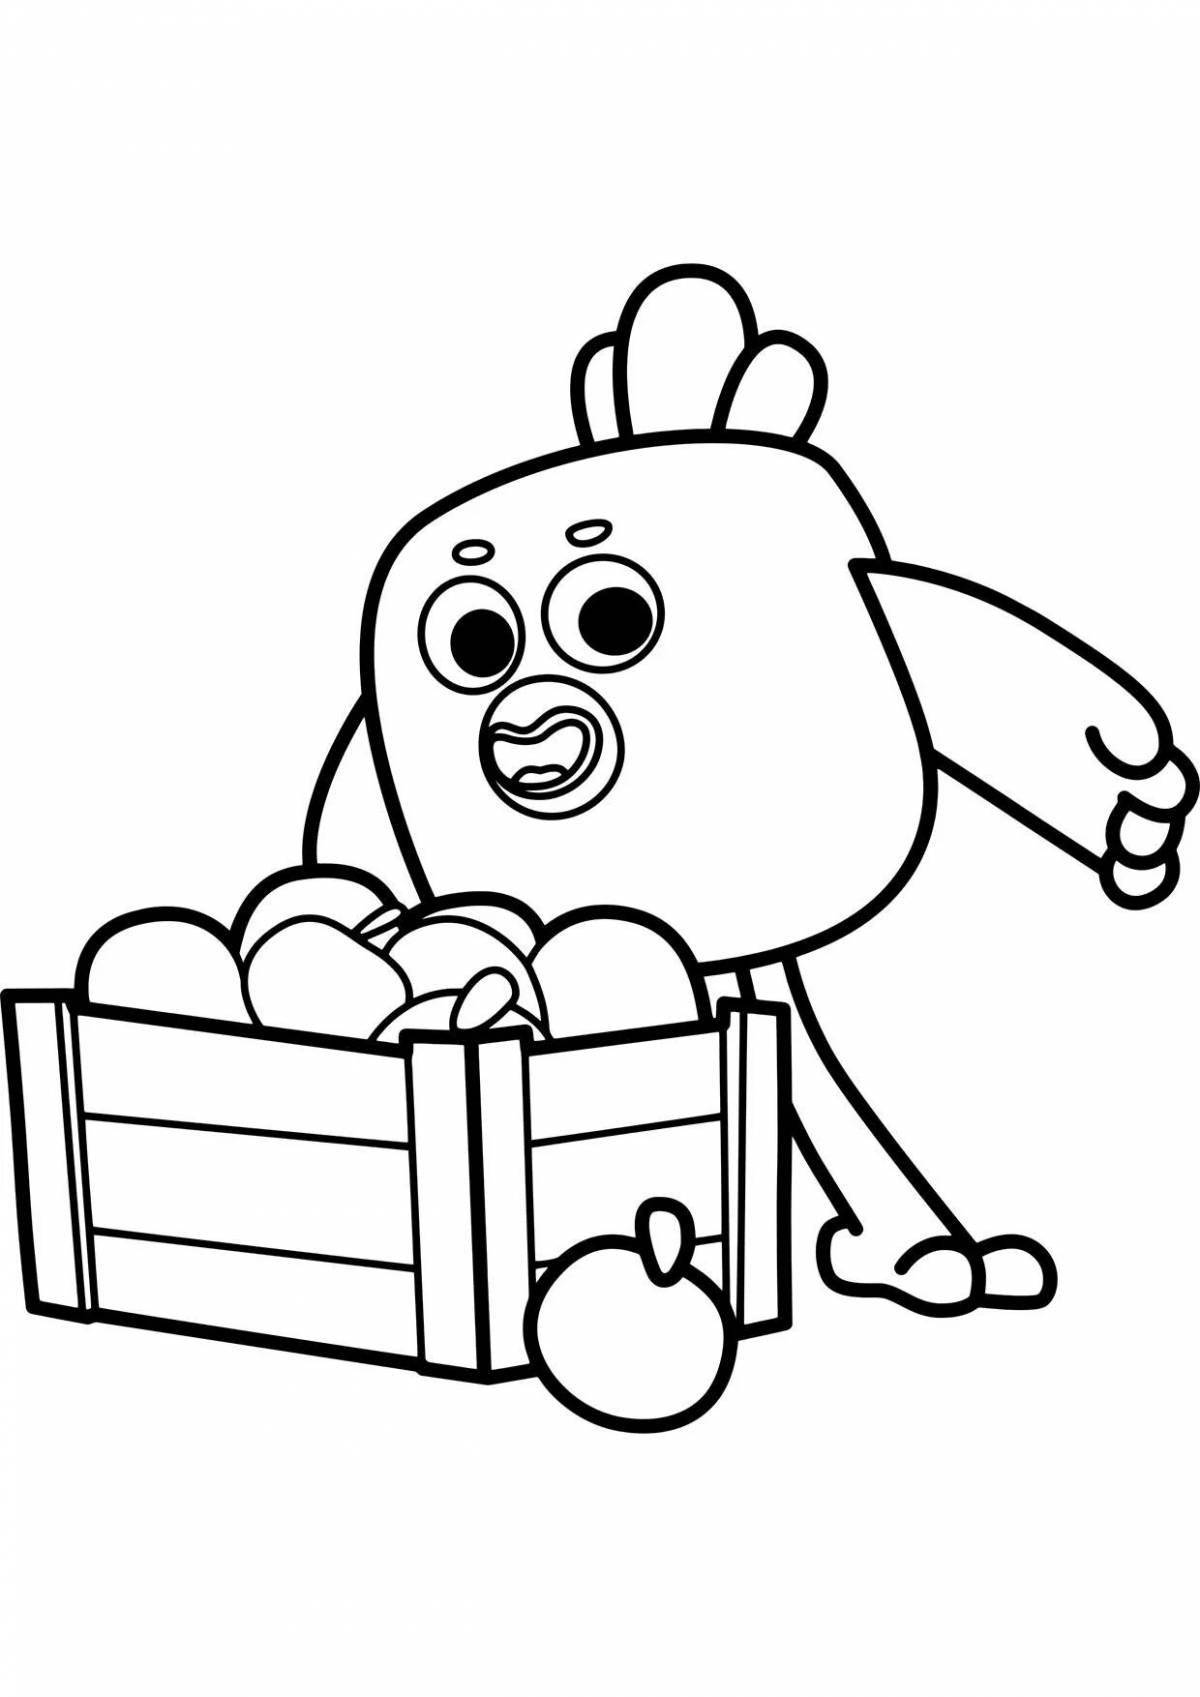 Fun coloring pages with bears for kids